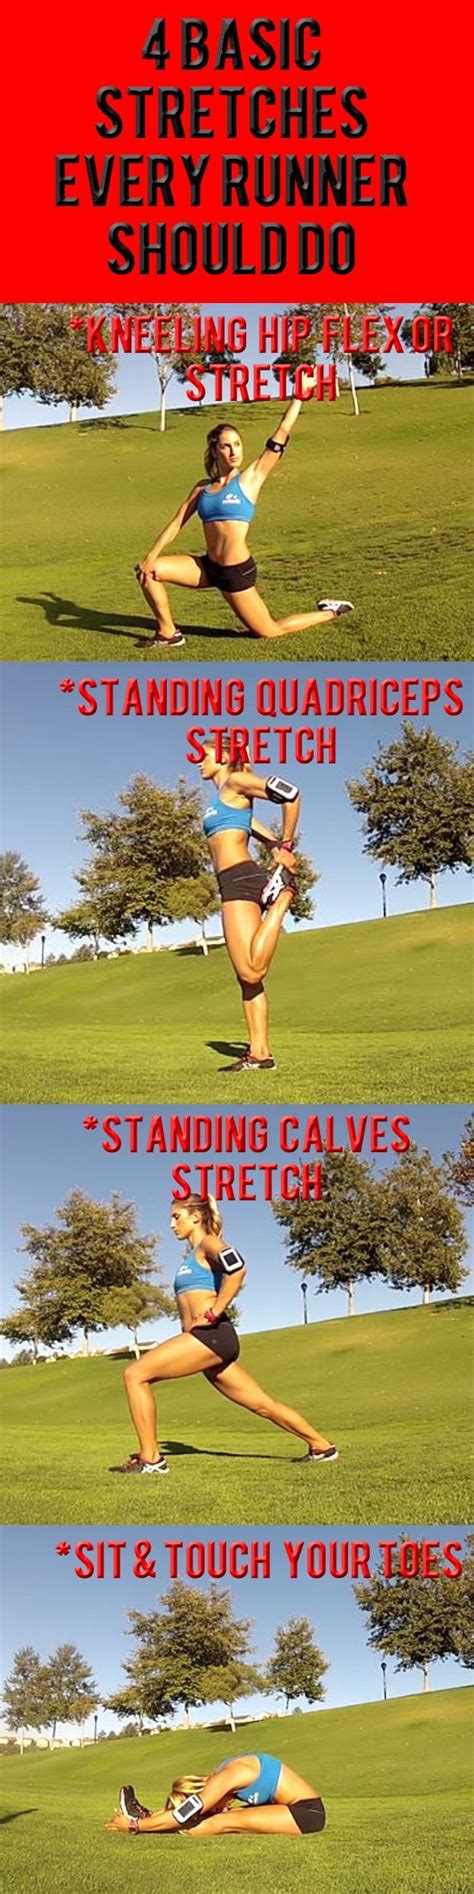 The Best Stretches For After Your Run Running Stretches Running Workouts Running Motivation